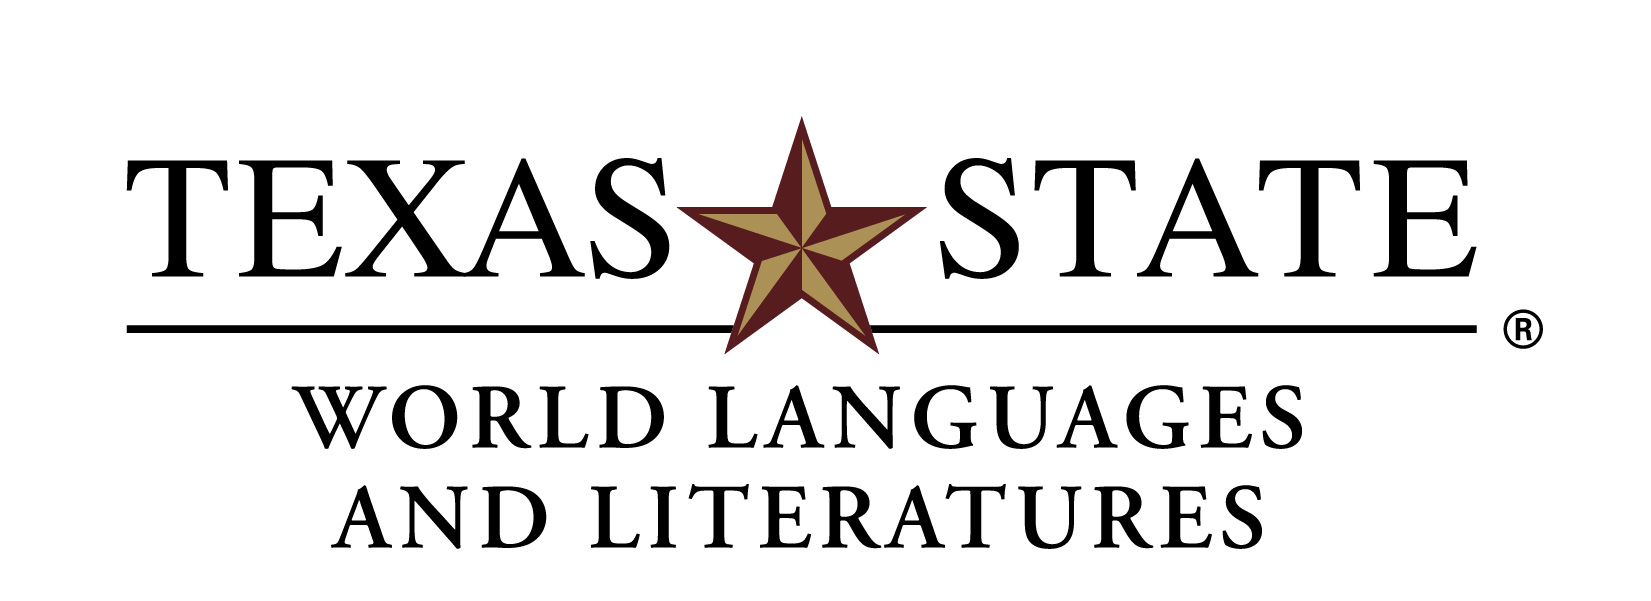 19-685_LIA-World Languages and Literatures Logo_1a_Primary_3color